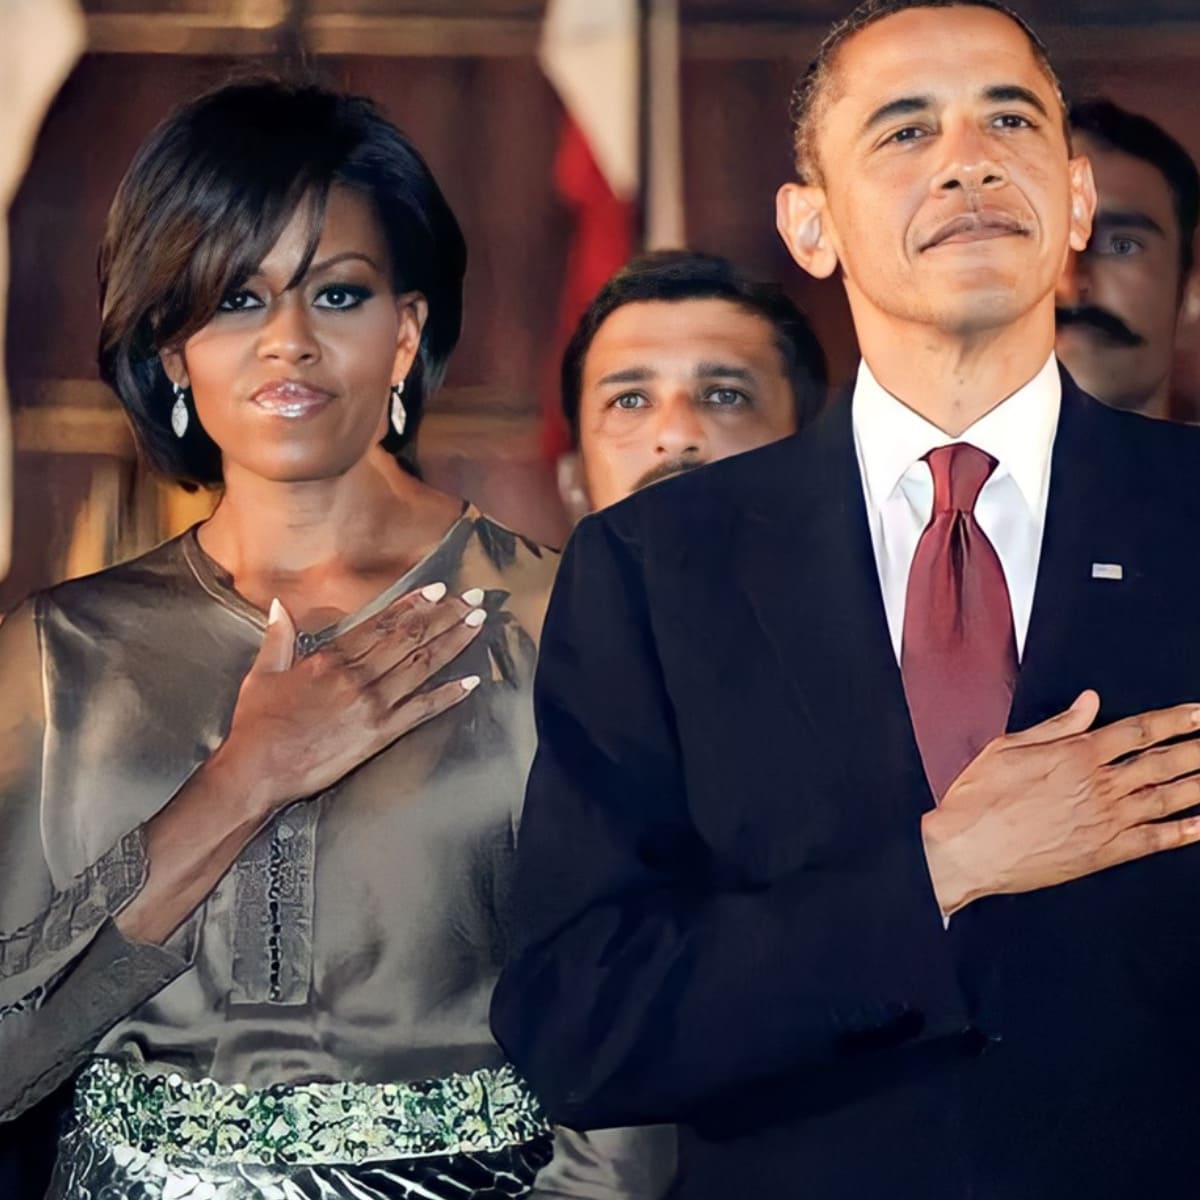 Barack Obama and his wife listen to the U.S. anthem